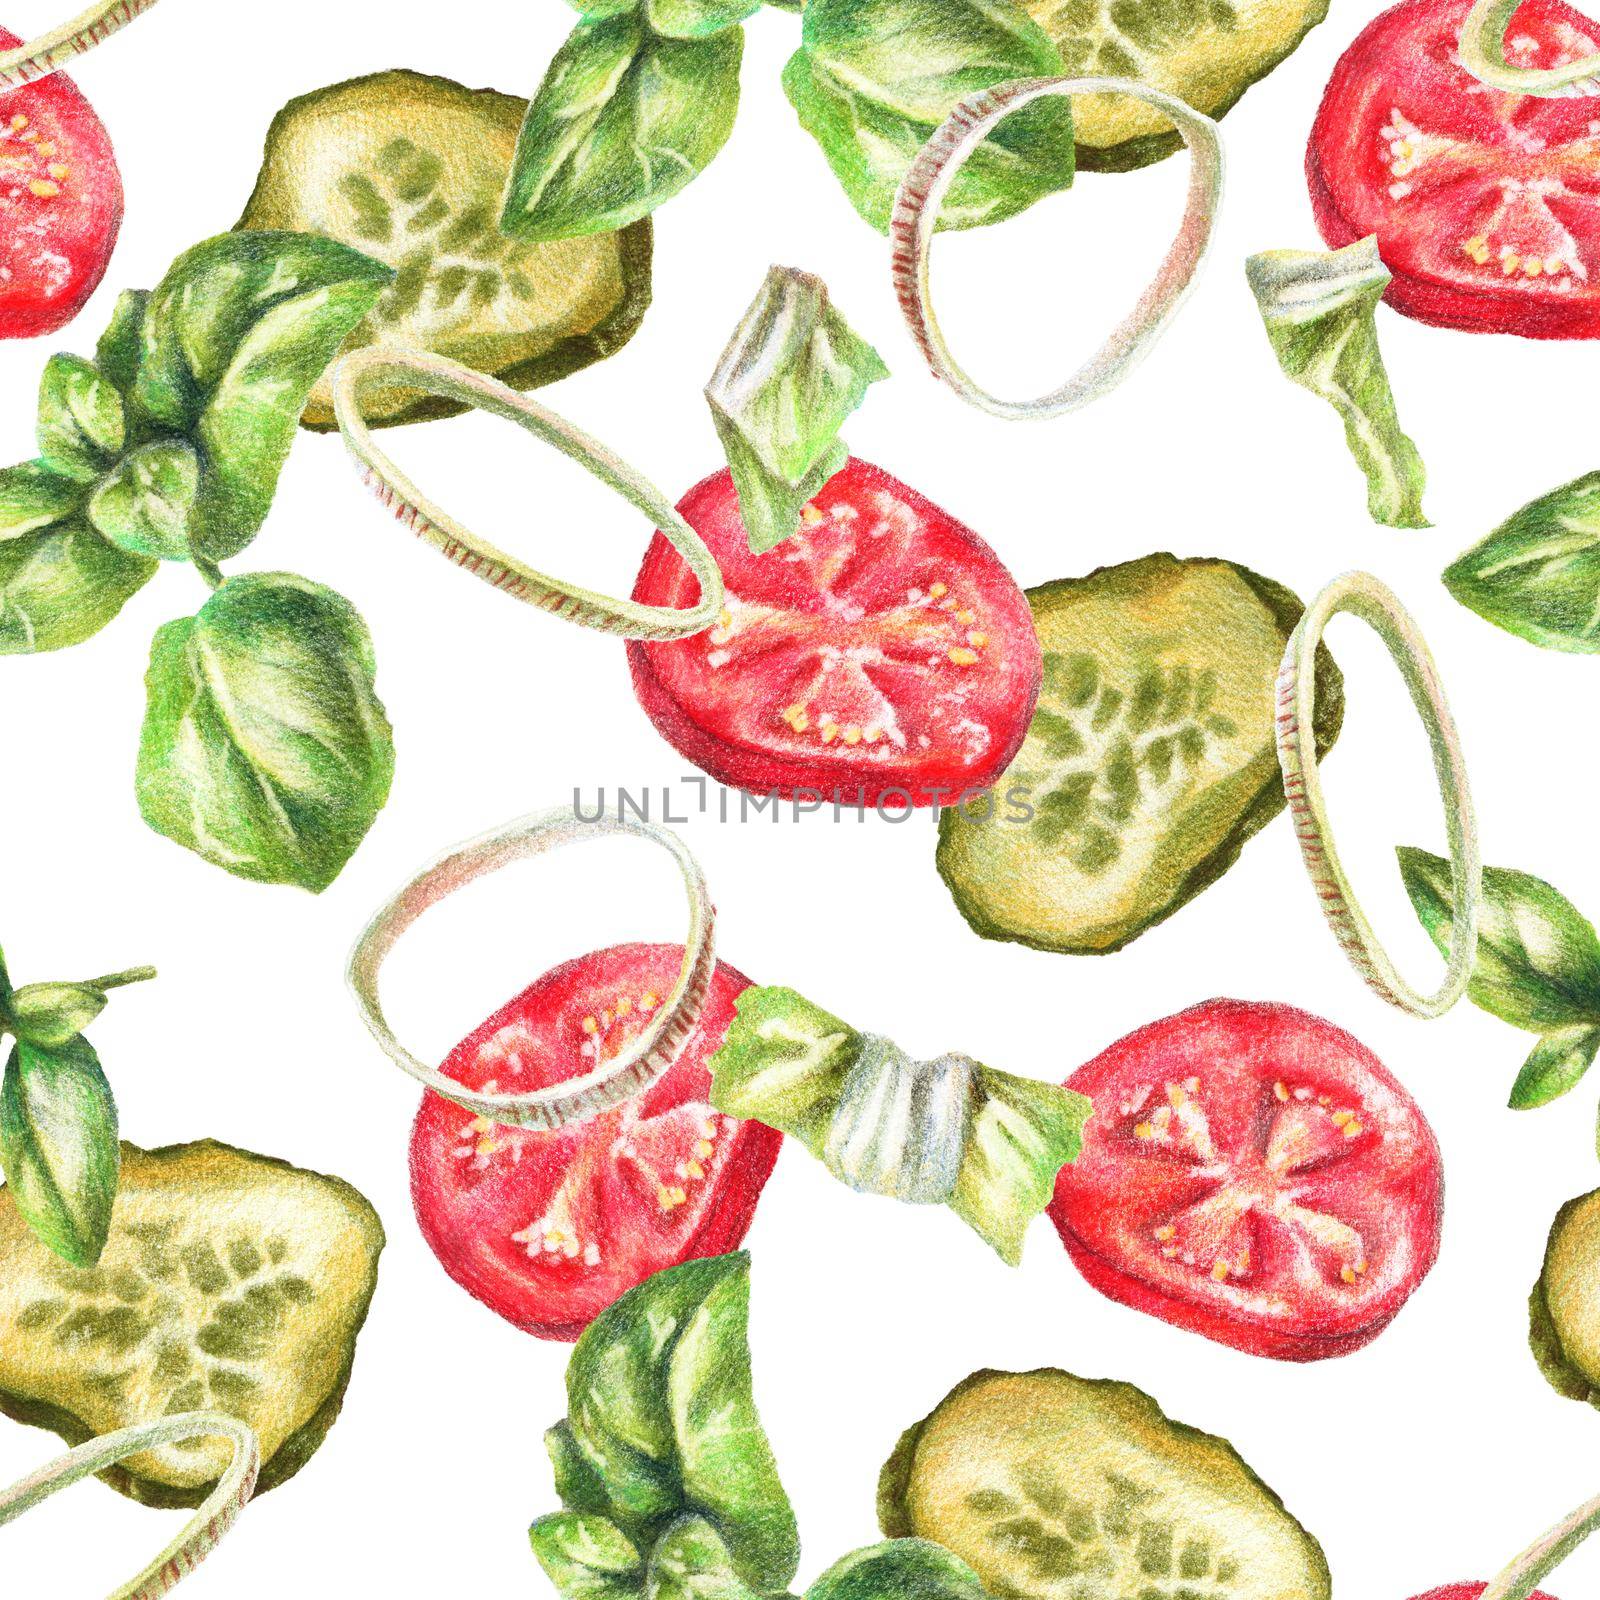 Color pencils realistic food illustration - tomato, pickle, onion, basil, lettuce leaves. Seamless pattern hand-drawn vegetables on white background.